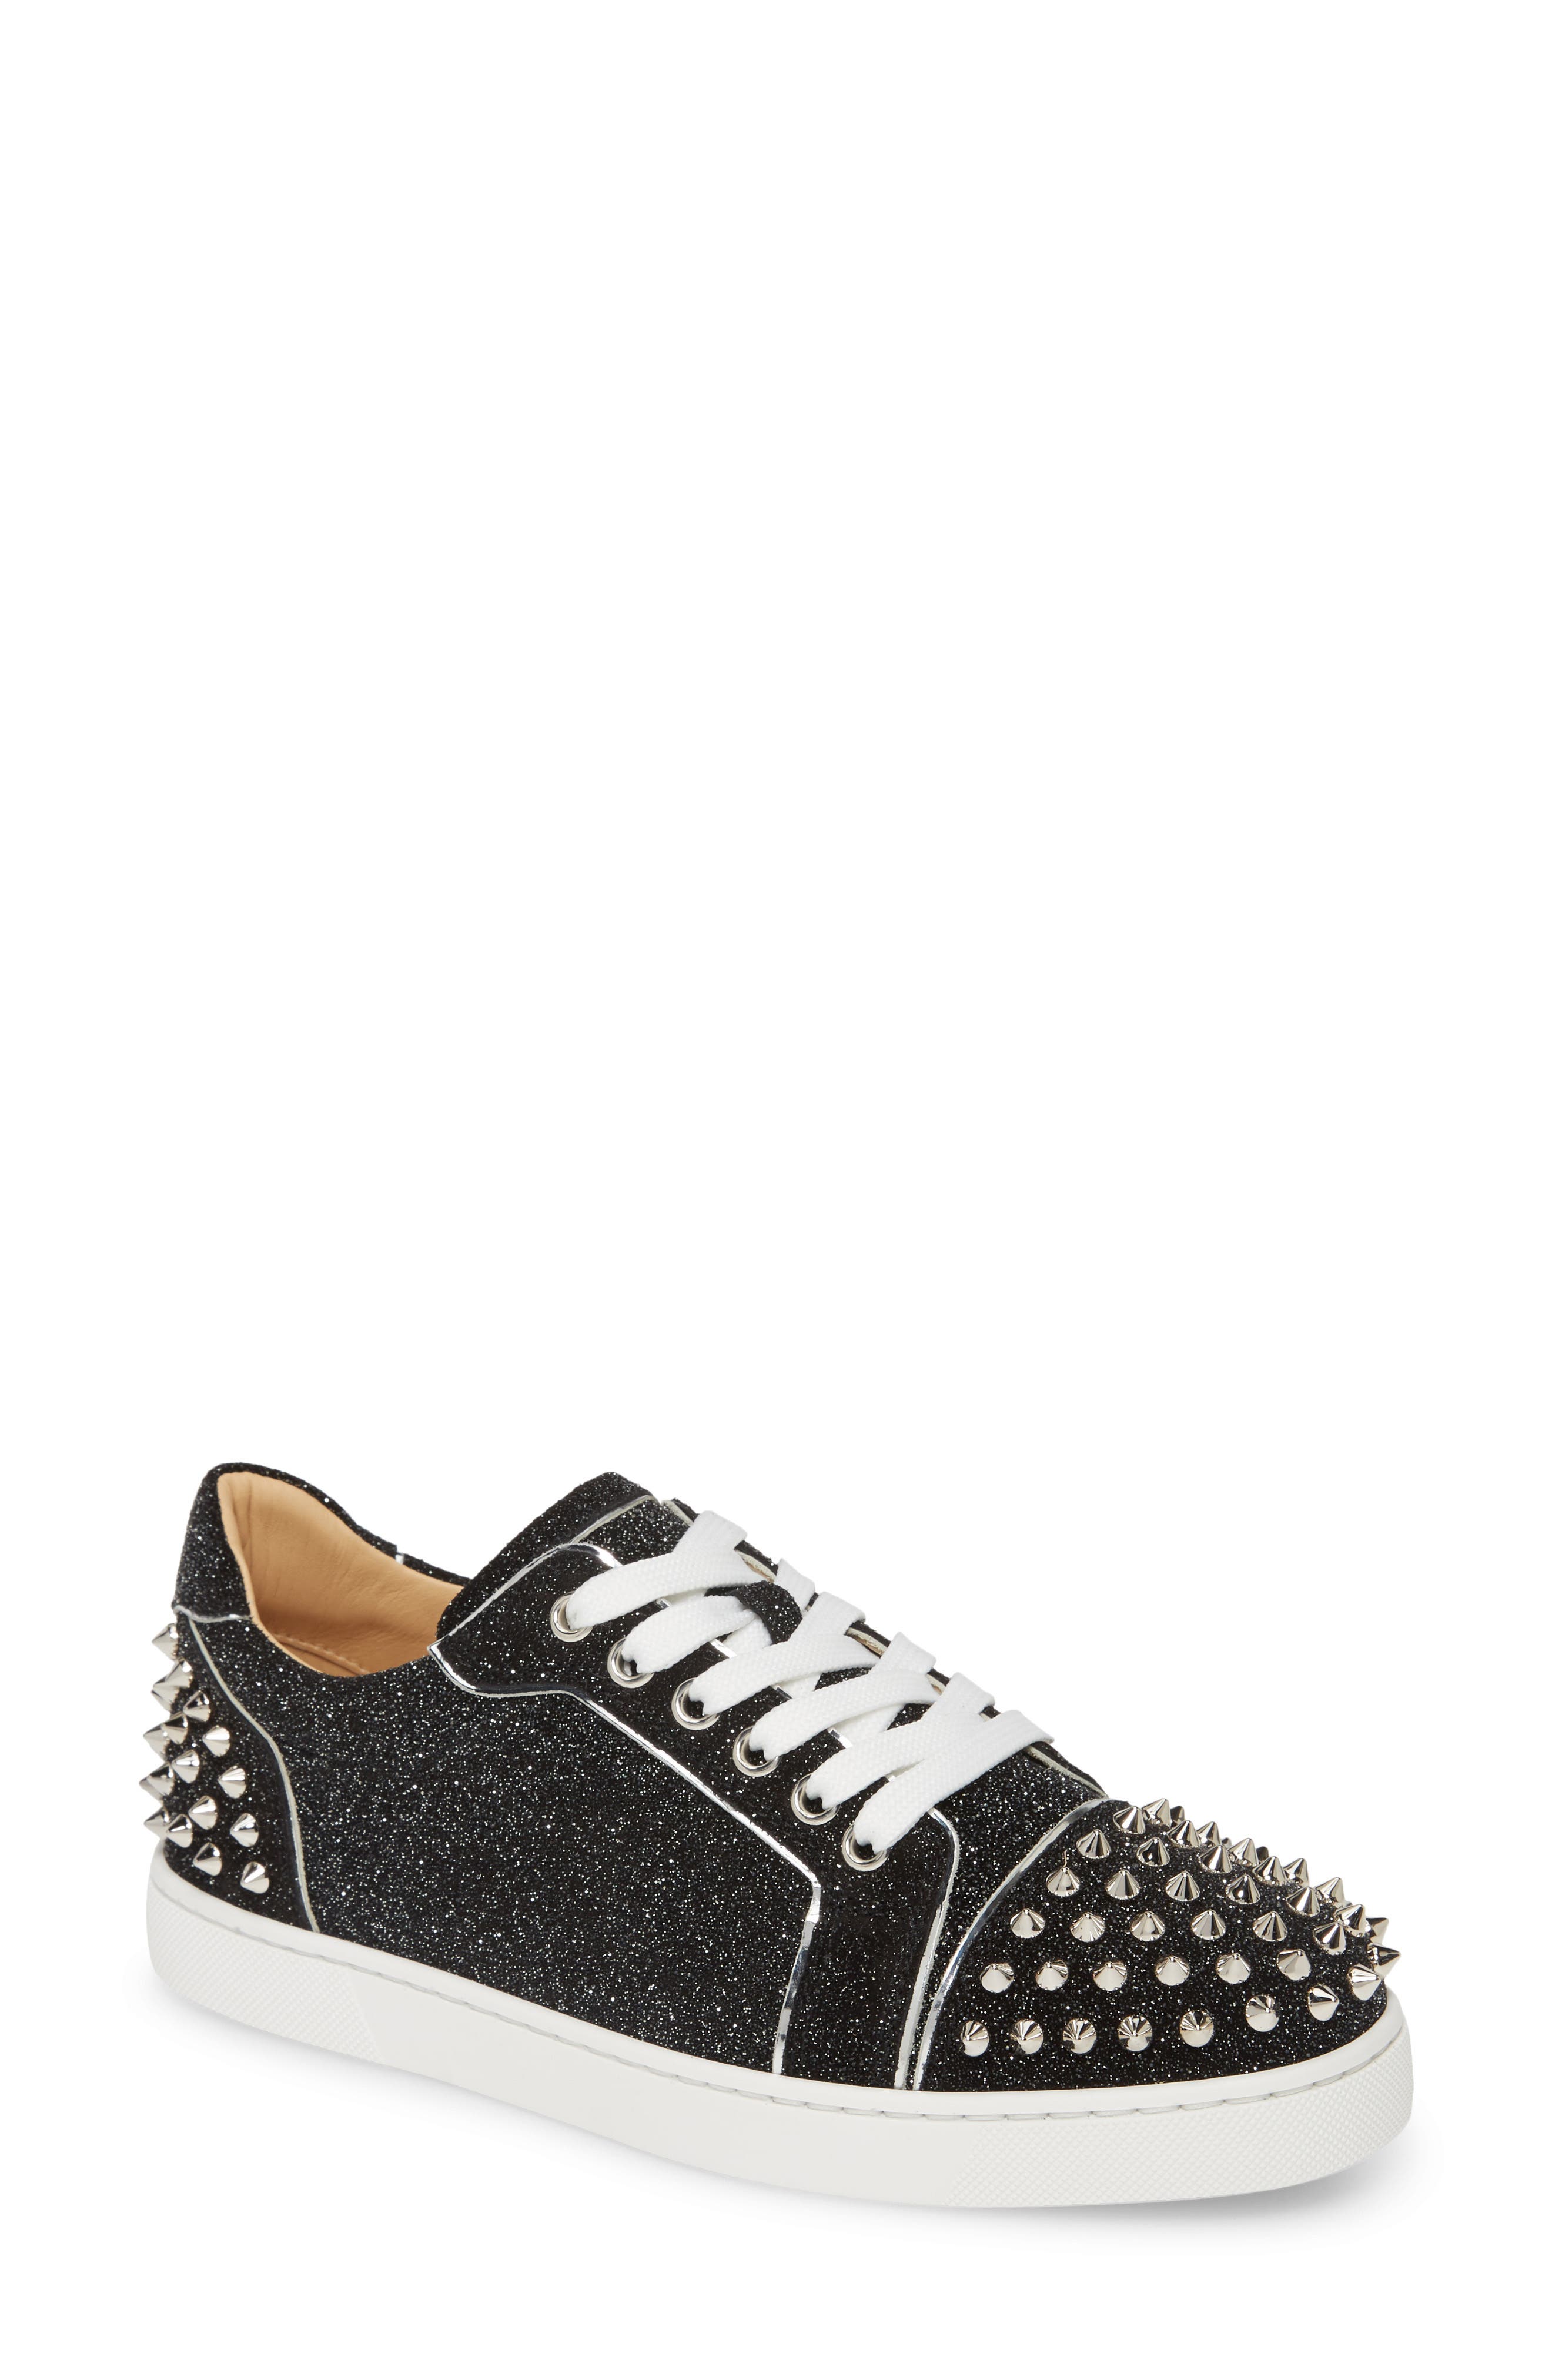 christian louboutin black spiked sneakers